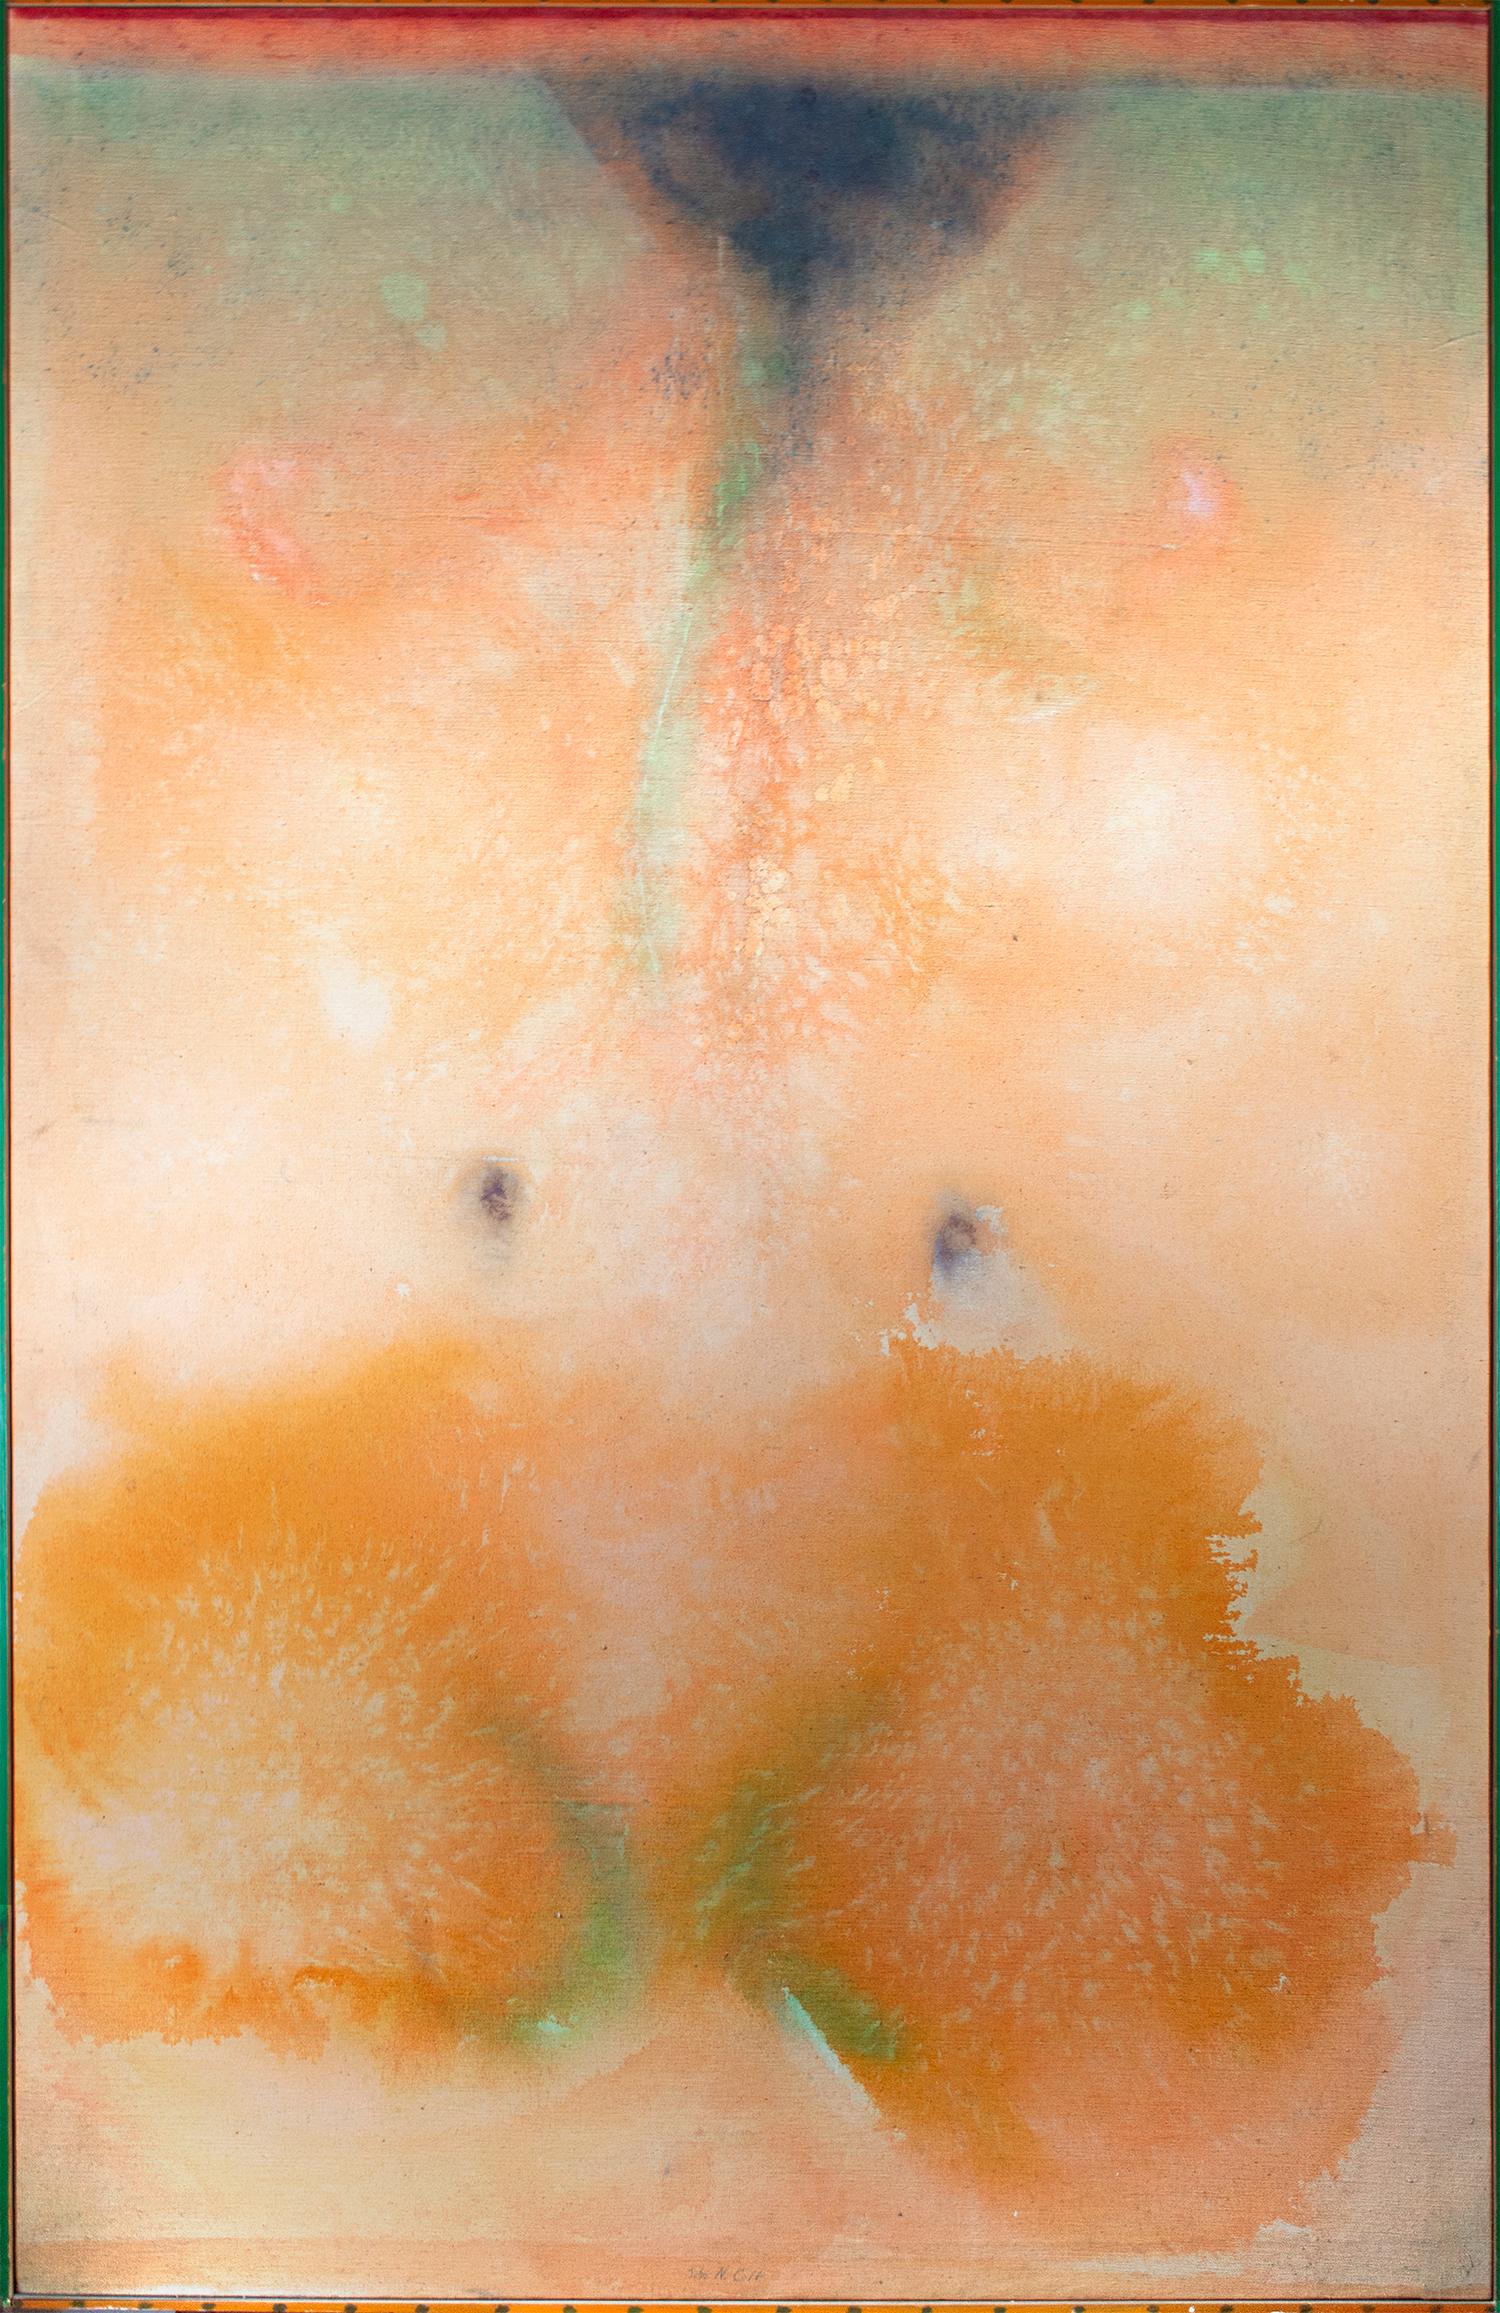 John Colt Abstract Painting - 'Peach Stoned' mixed media painting peach abstract expressionist